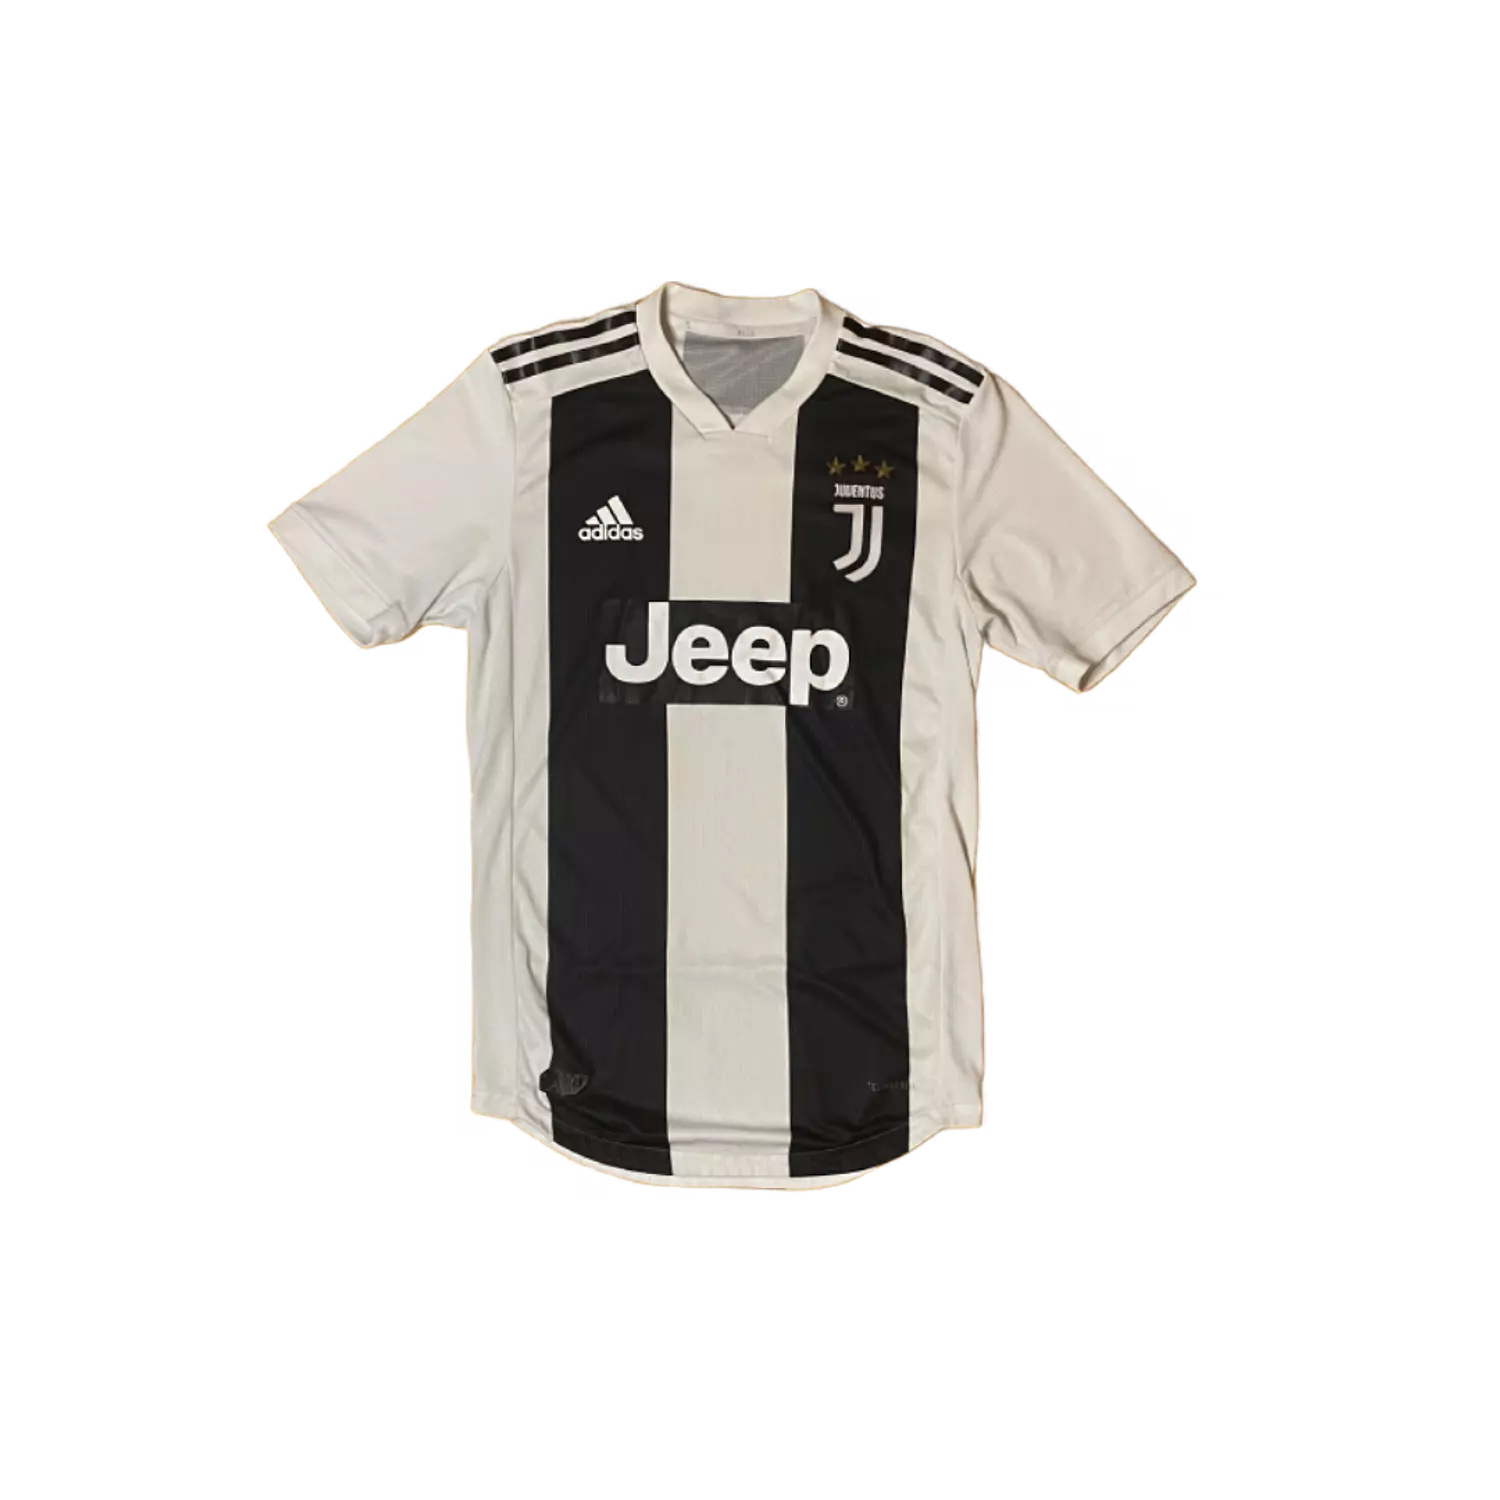 Juventus 2018/19 Home Kit (S) Player Issue hover image